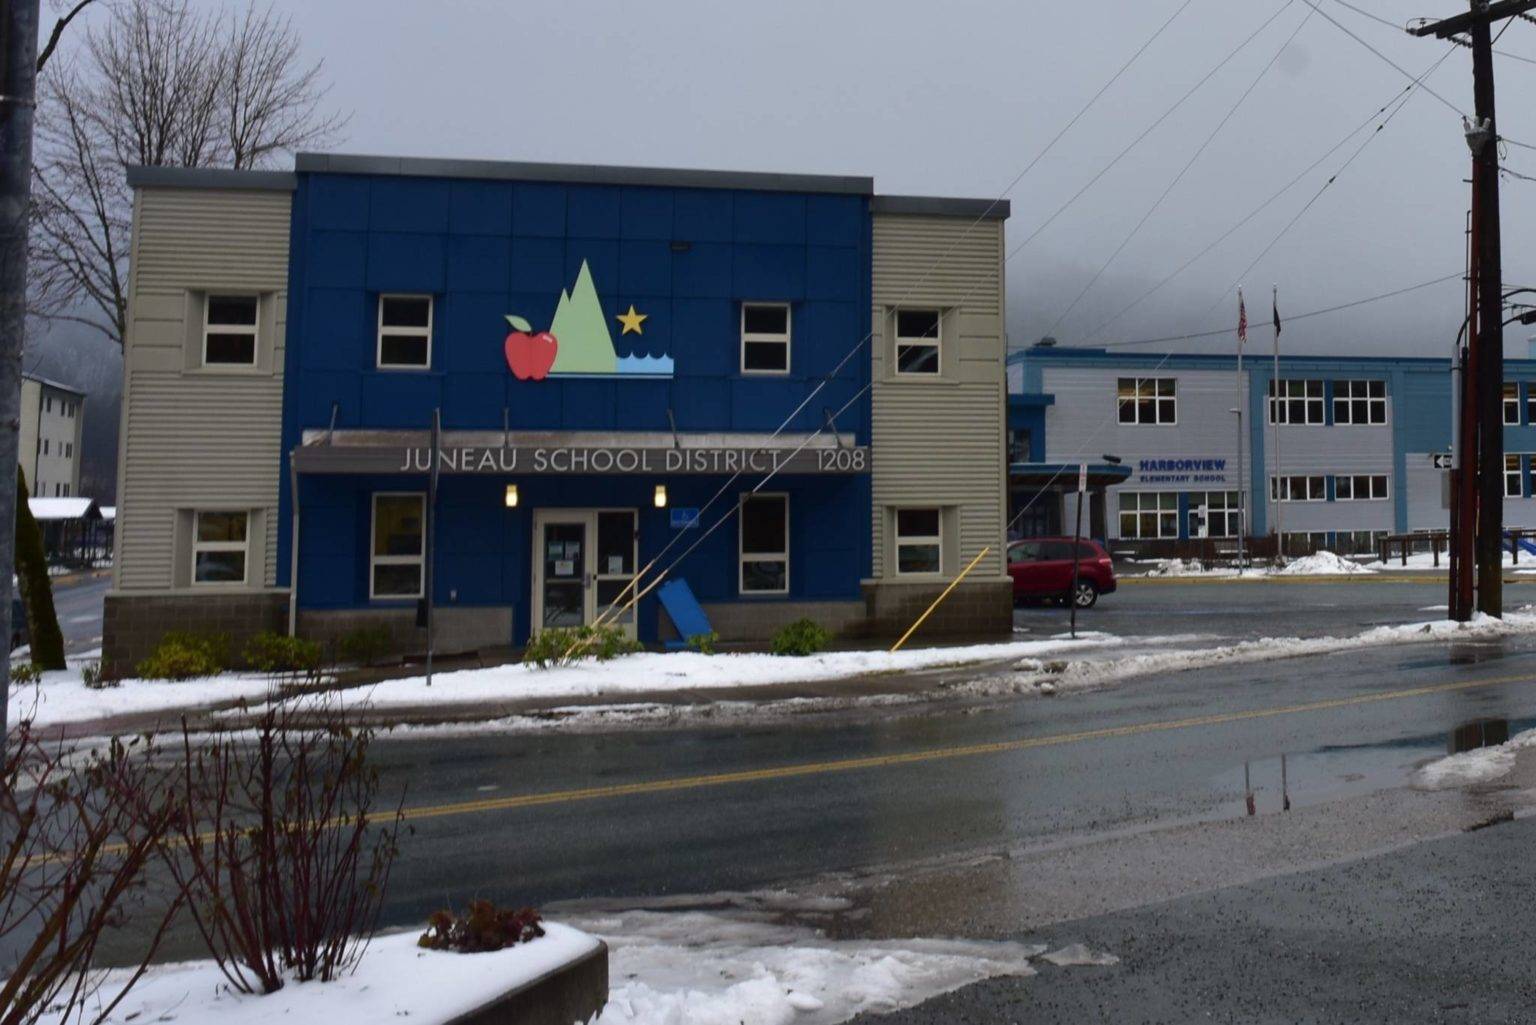 The Juneau School District building and Harborview Elementary School, seen here on Monday, Nov. 9, 2020, will have students back in classes in January. The district released its schedule for students to return Tuesday. (Peter Segall / Juneau Empire)